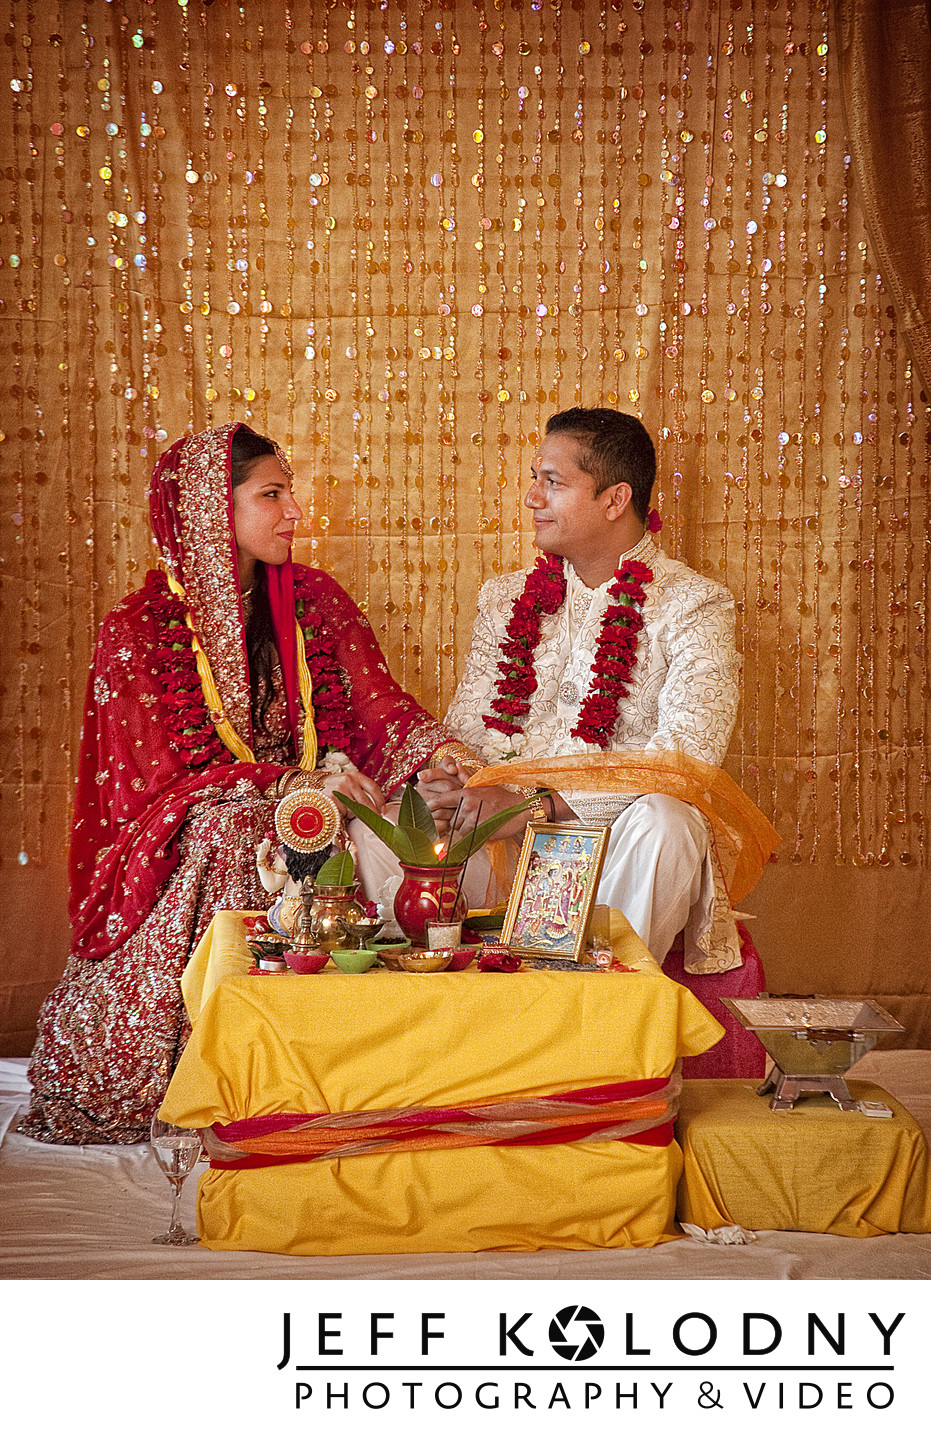 Ceremony picture from an Indian wedding.